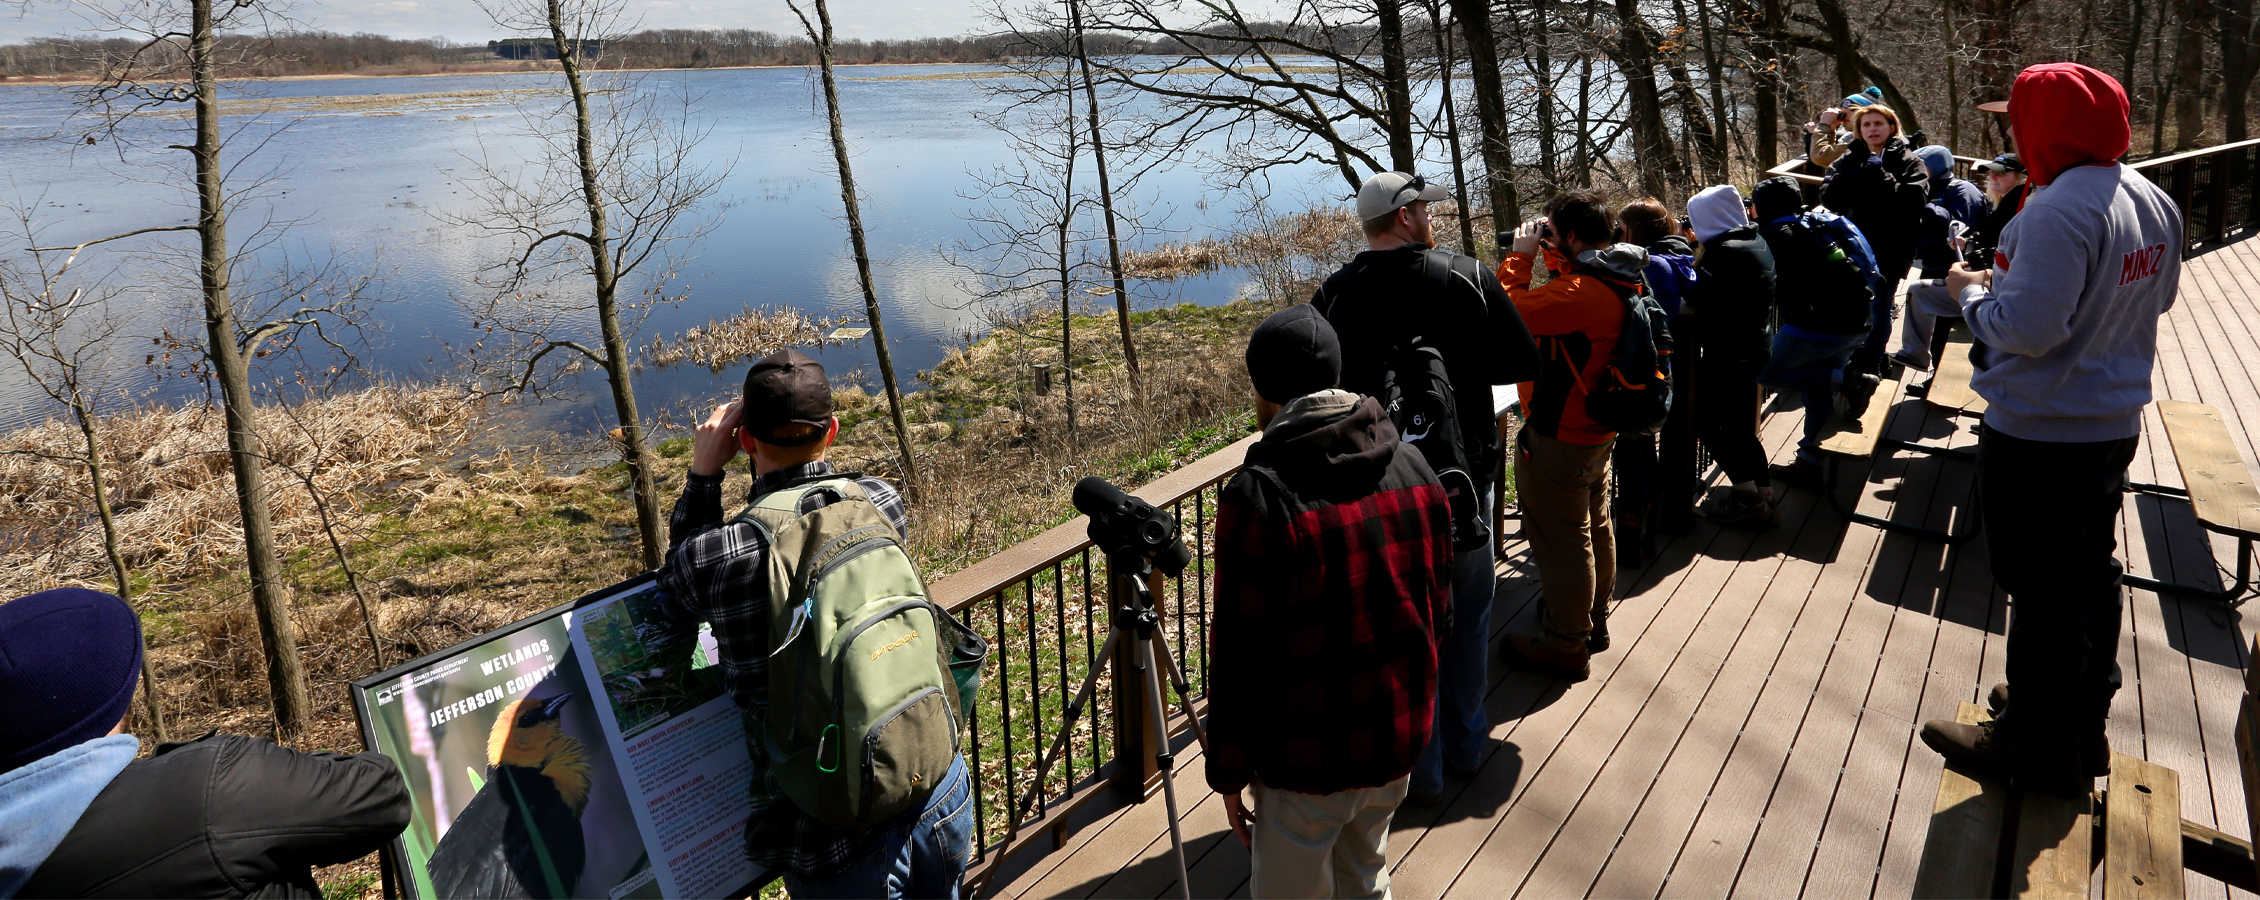 Students stand on a deck and look over Rose Lake State Natural Area through binoculars.